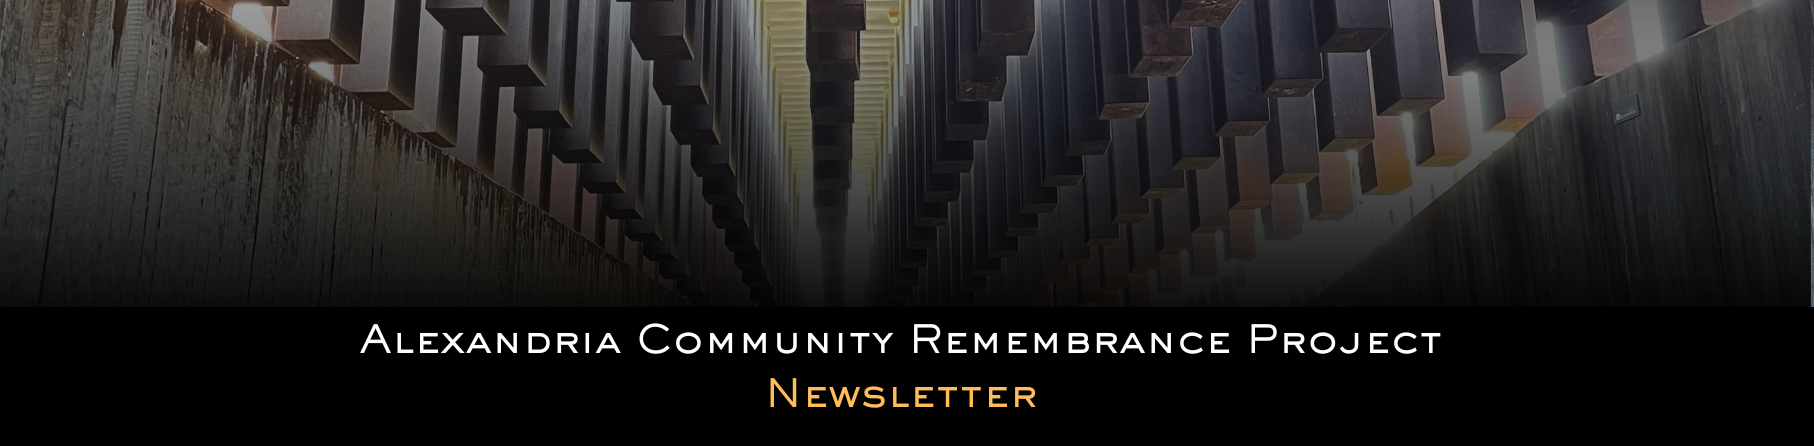 Alexandria Community Remembrance Project Newsletter, with image of pillars at EJI